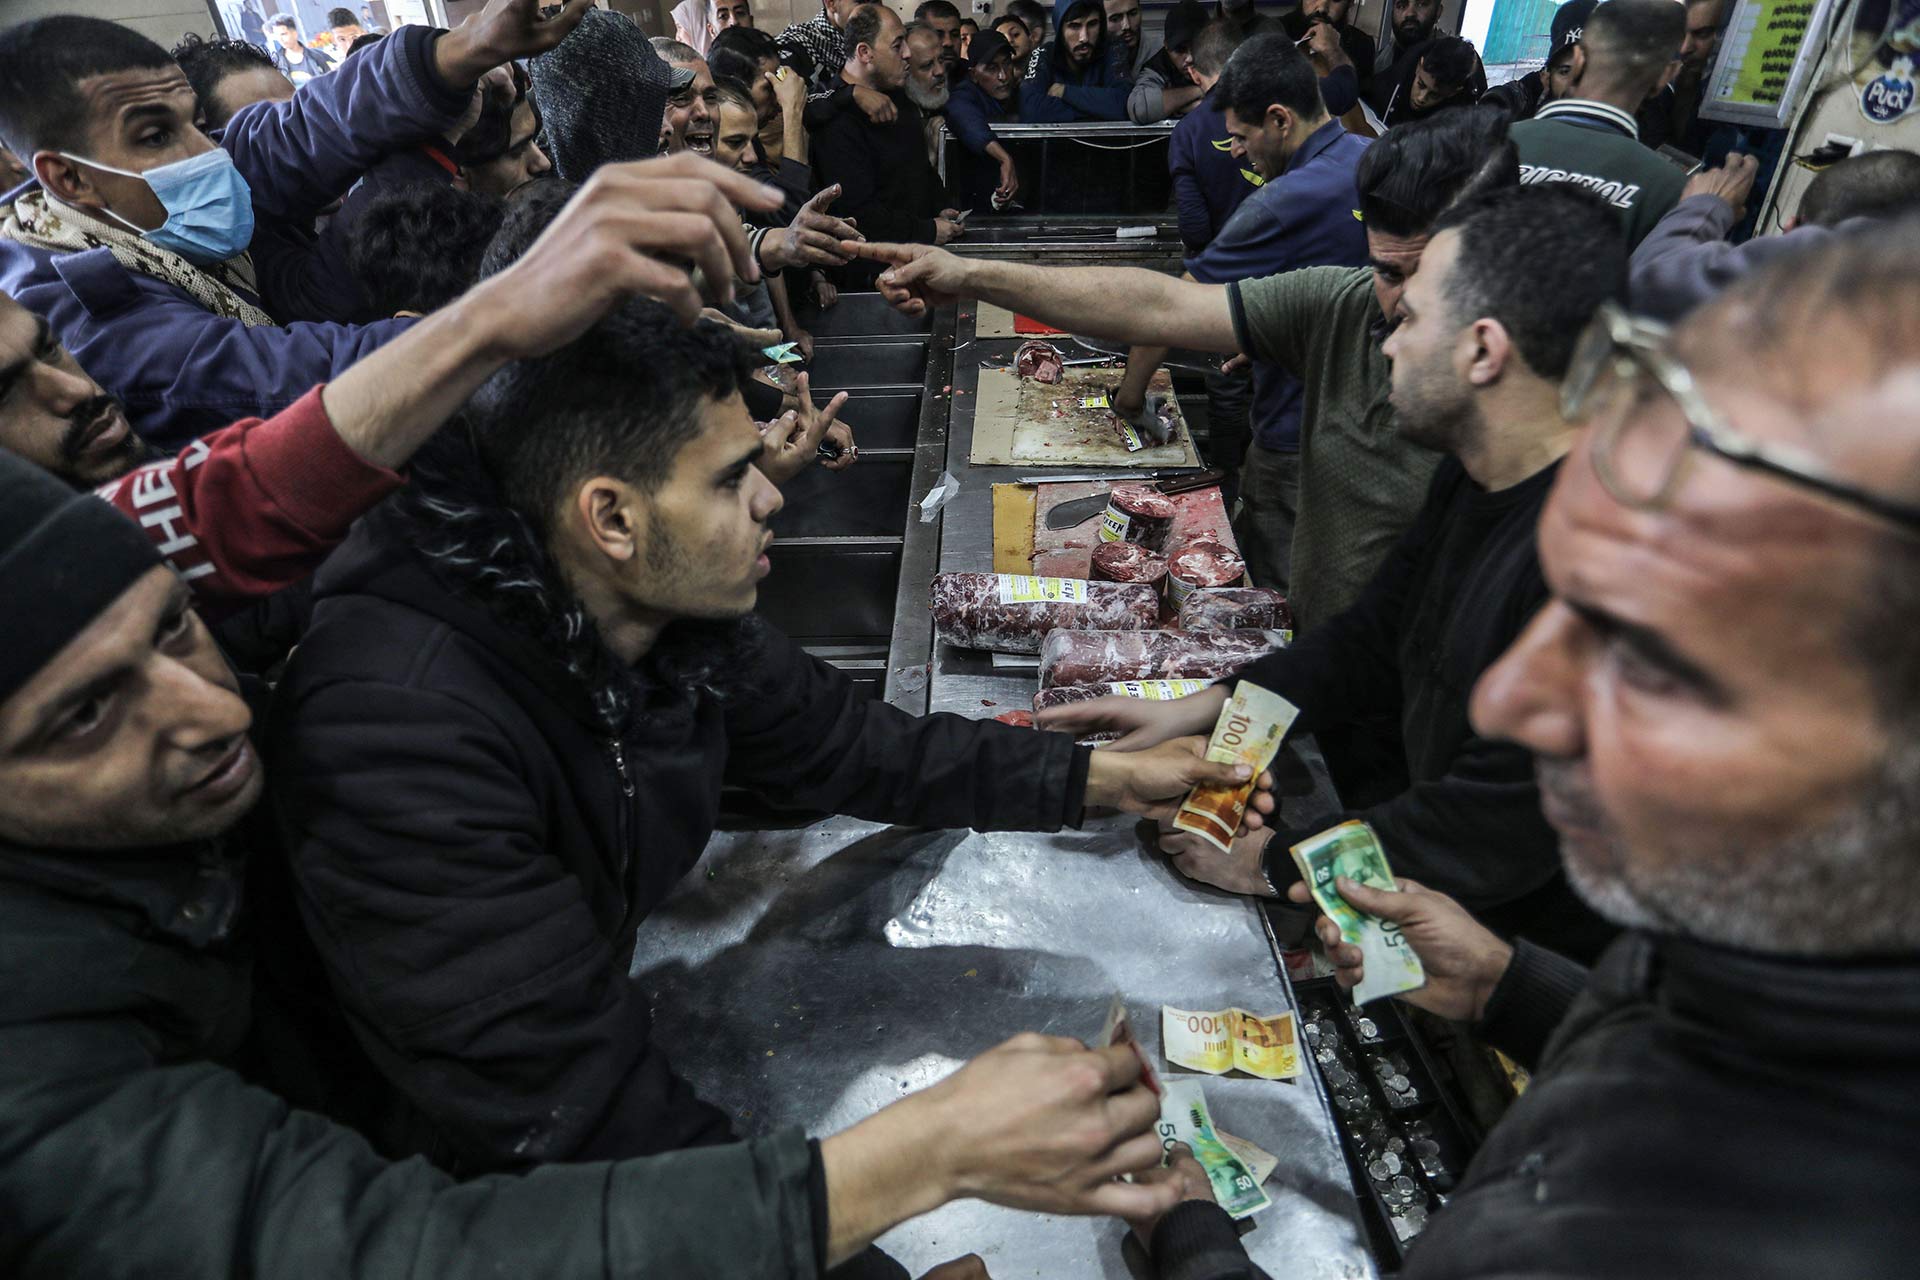  Middlemen Push Up Prices As Gazans Struggle To Survive